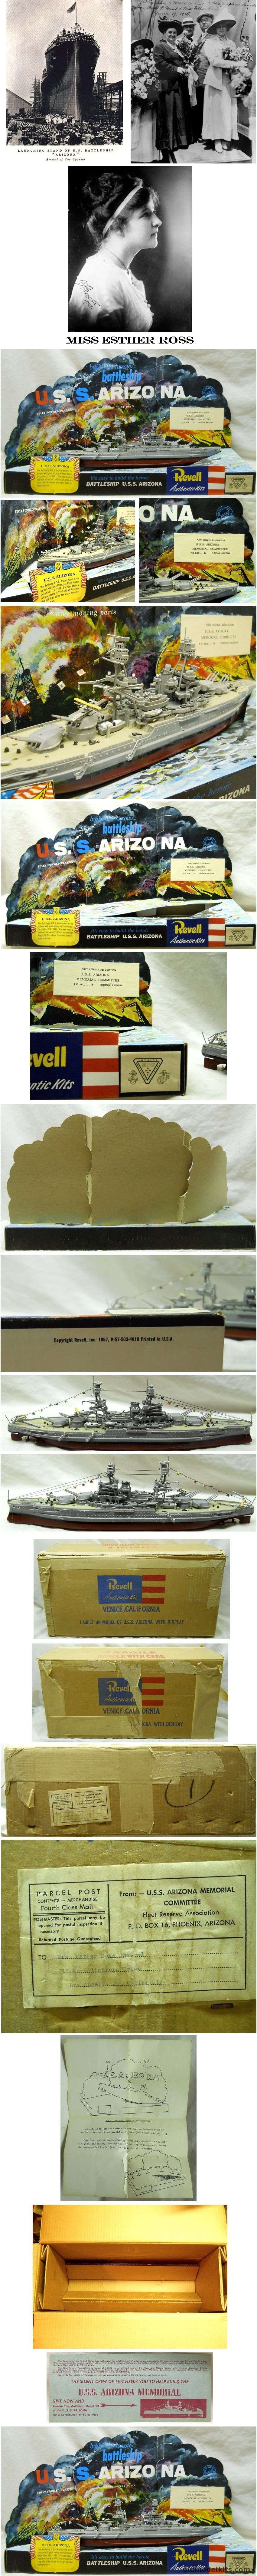 Revell Documented Arizona Factory Display Owned By Esther Ross, Who Christened The USS Arizona plastic model kit